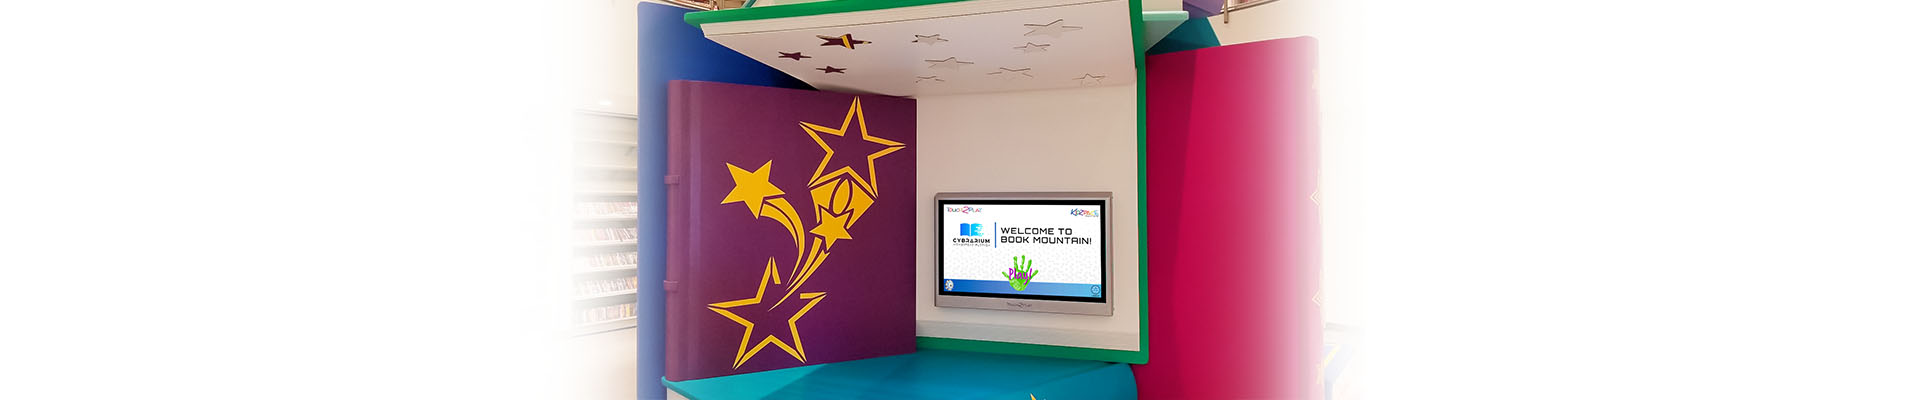 Electronic Games for Libraries - Touch2Play Wall interactive touchscreen play wall designed for young children